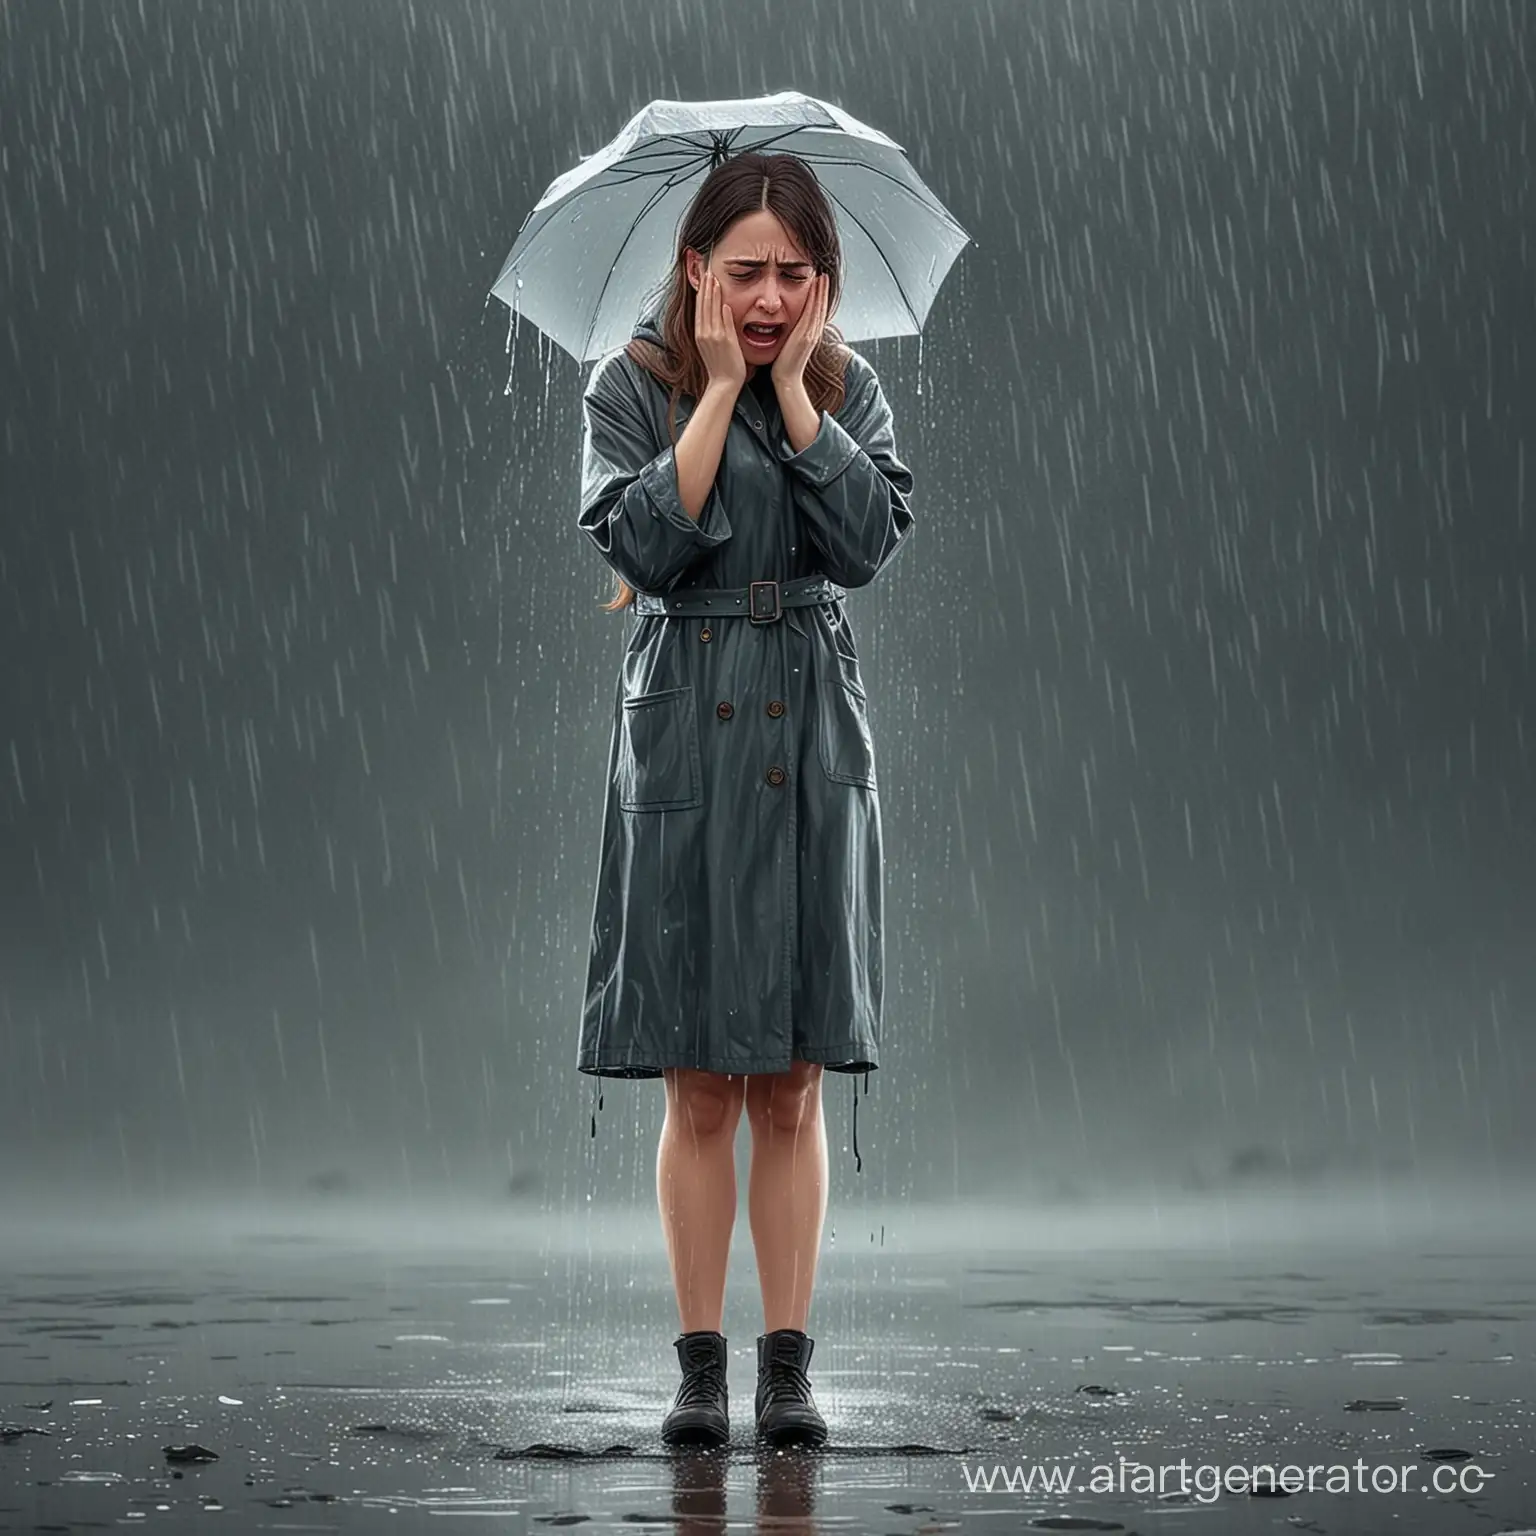 Cartoon-Woman-Crying-in-Rain-Expressive-Offended-Emotion-Illustration